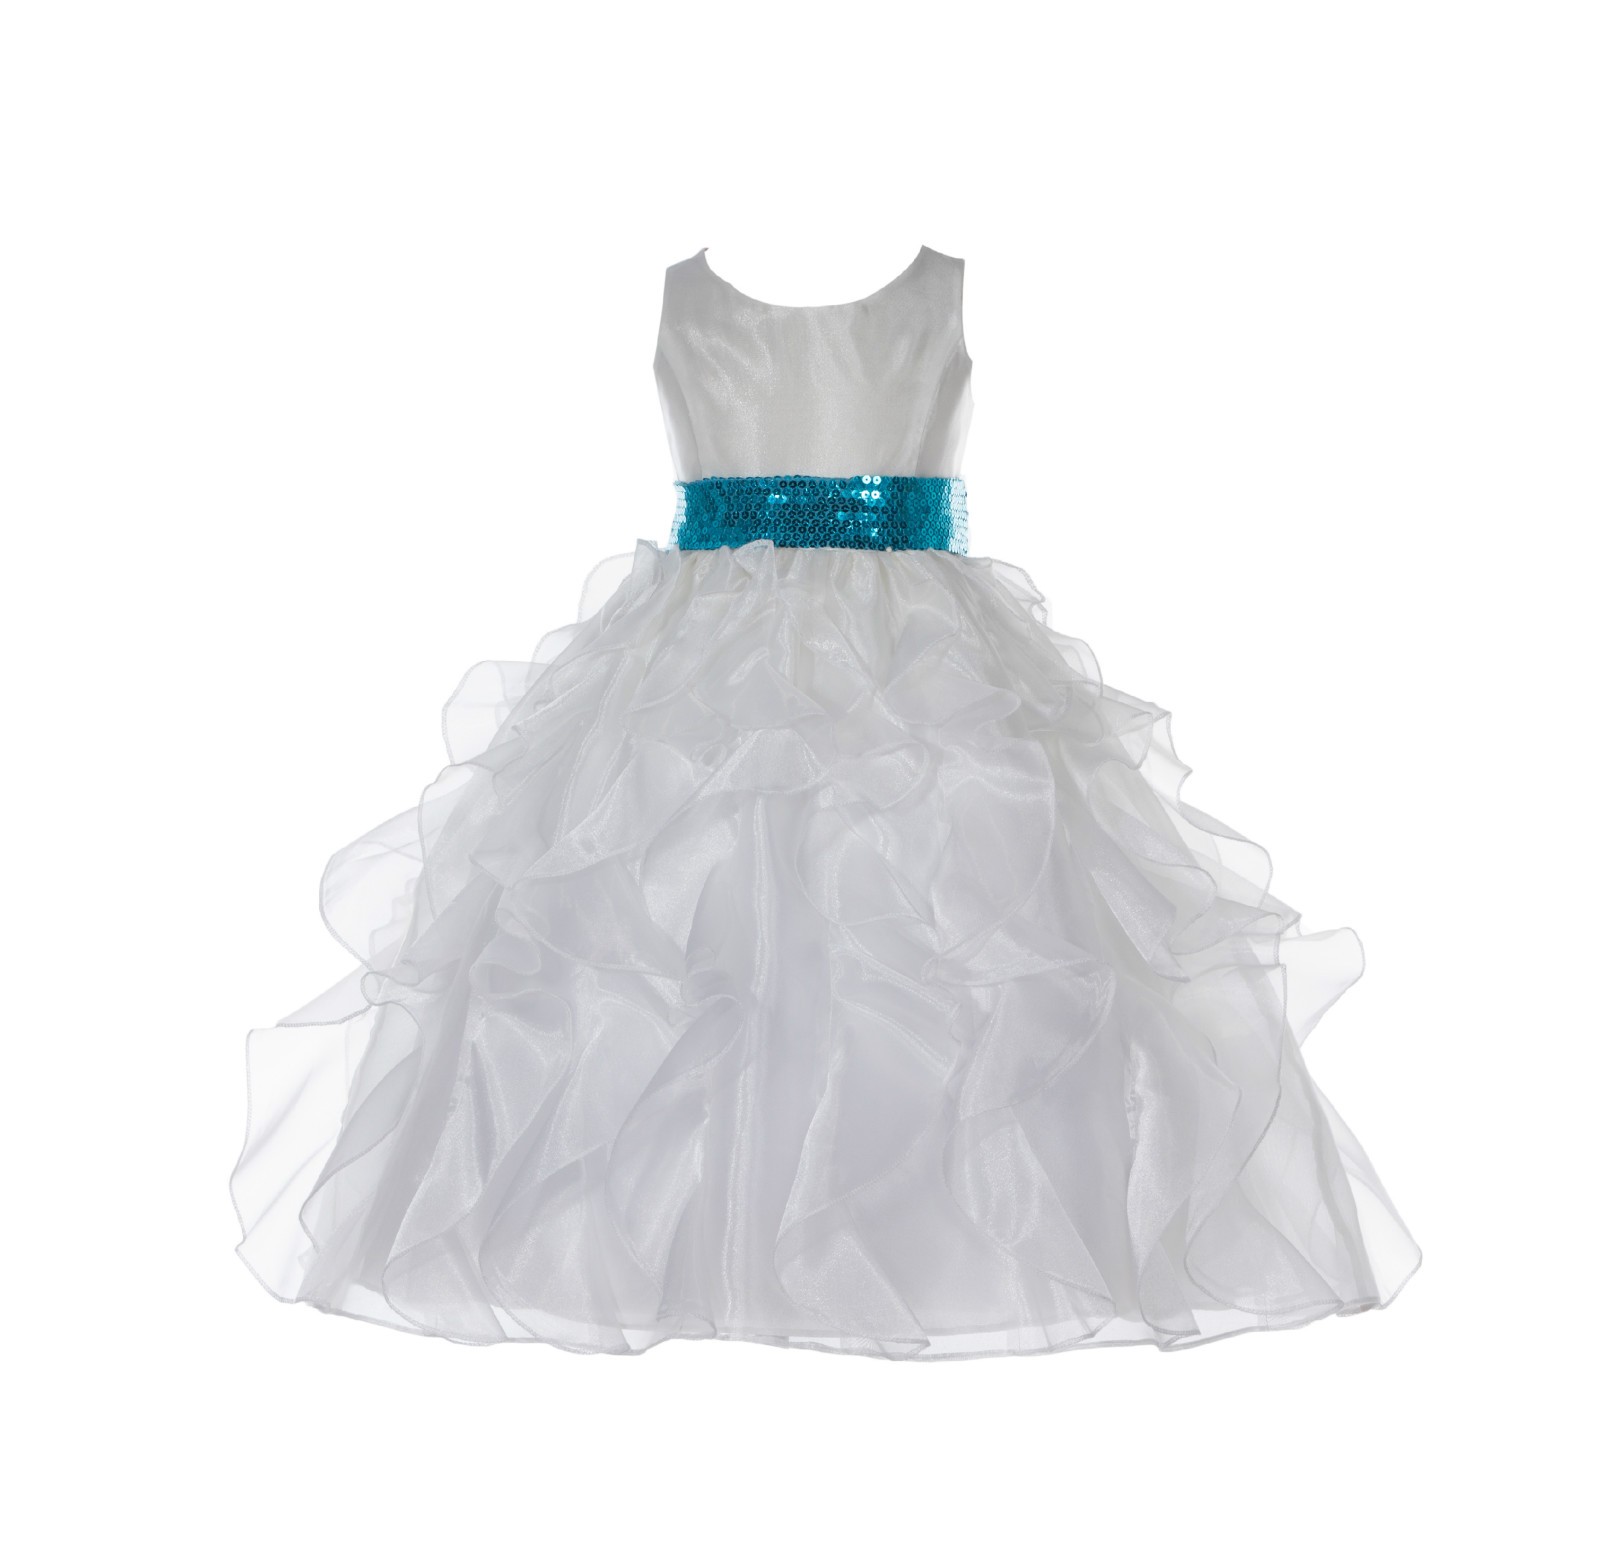 Ivory Ruffled Organza Turquoise Sequin Sash Flower Girl Dress 168mh